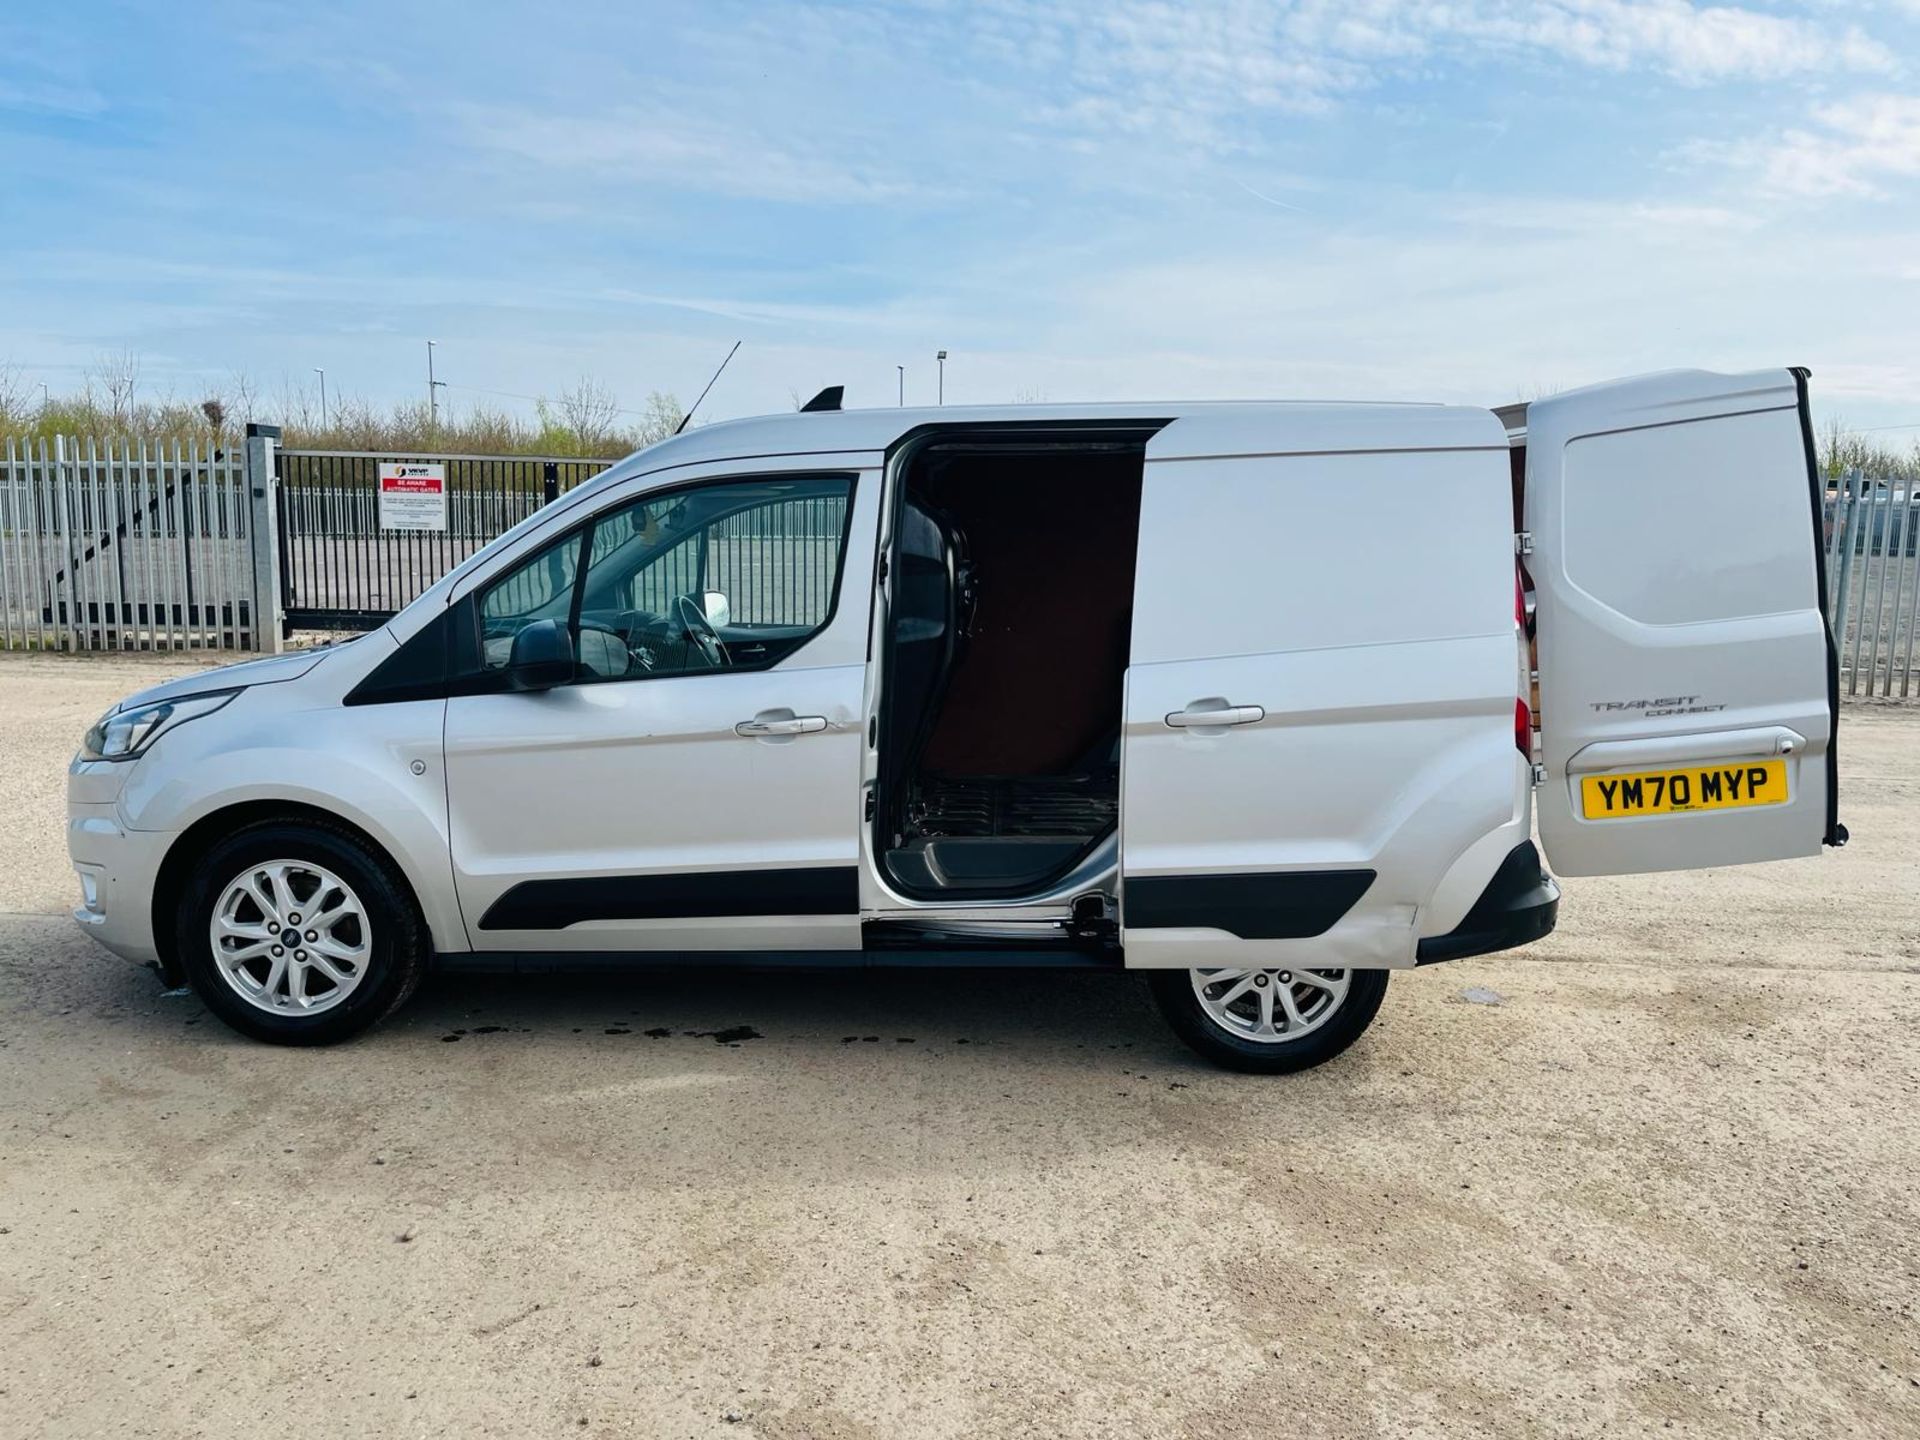 Ford Transit Connect 1.5 TDCI L1H1-2020 '70 Reg'- 1 Previous Owner -Alloy Wheels -Sat Nav - A/C - Image 5 of 28